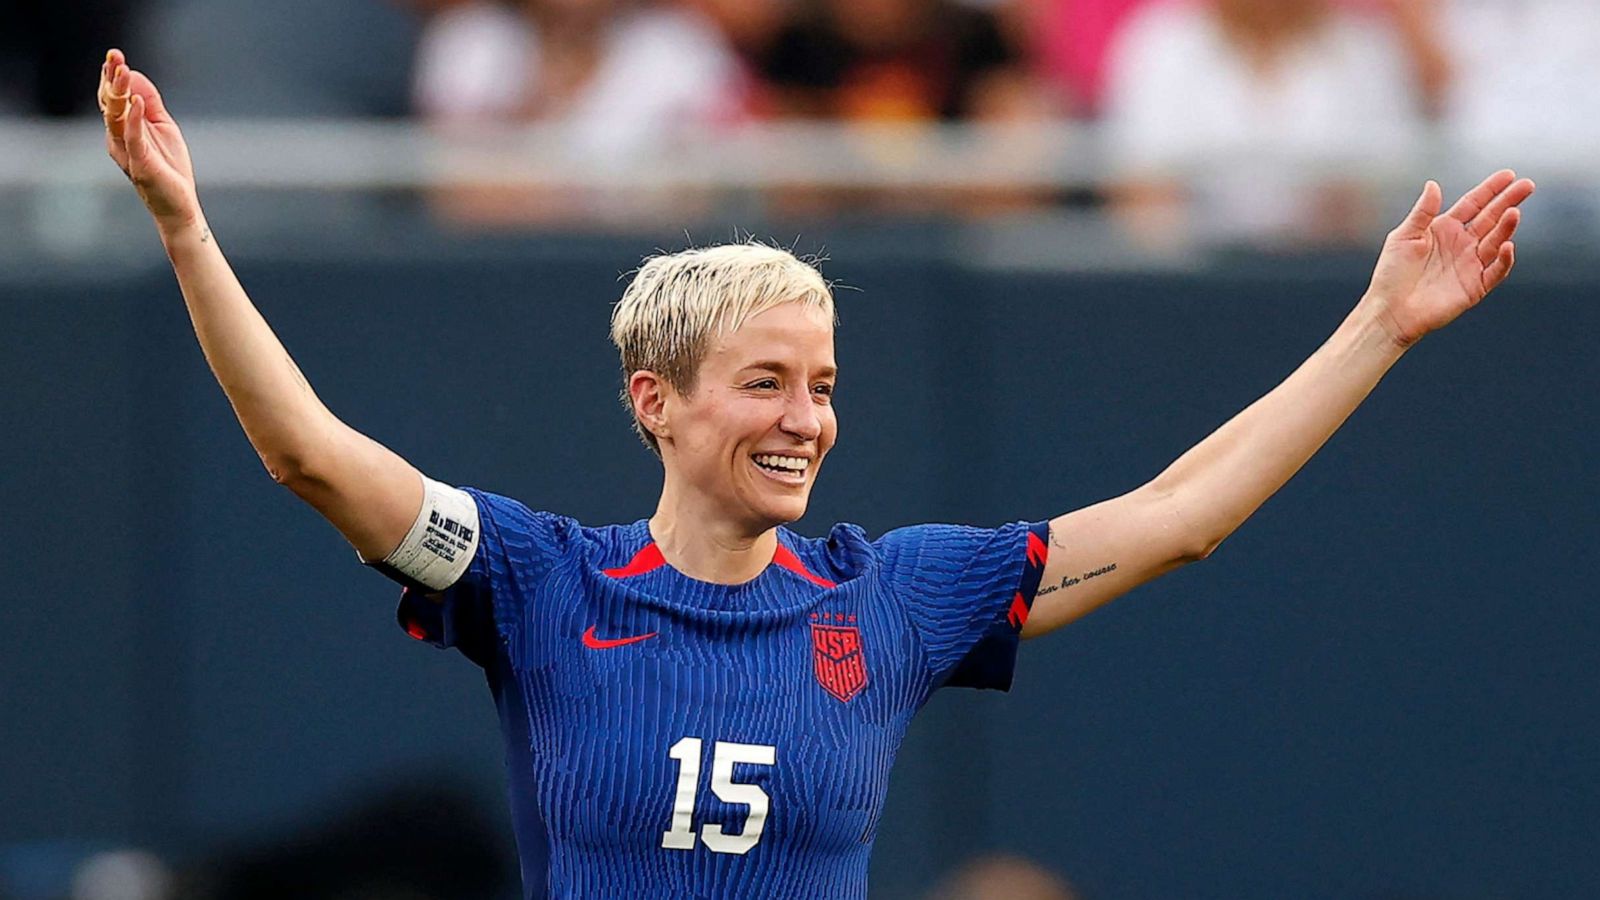 PHOTO: Megan Rapinoe celebrates her team's second goal scored by USA's defender #14 Emily Sonnett (out of frame) during the women's international friendly football match between the USA and South Africa at Soldier Field in Chicago on September 24, 2023.